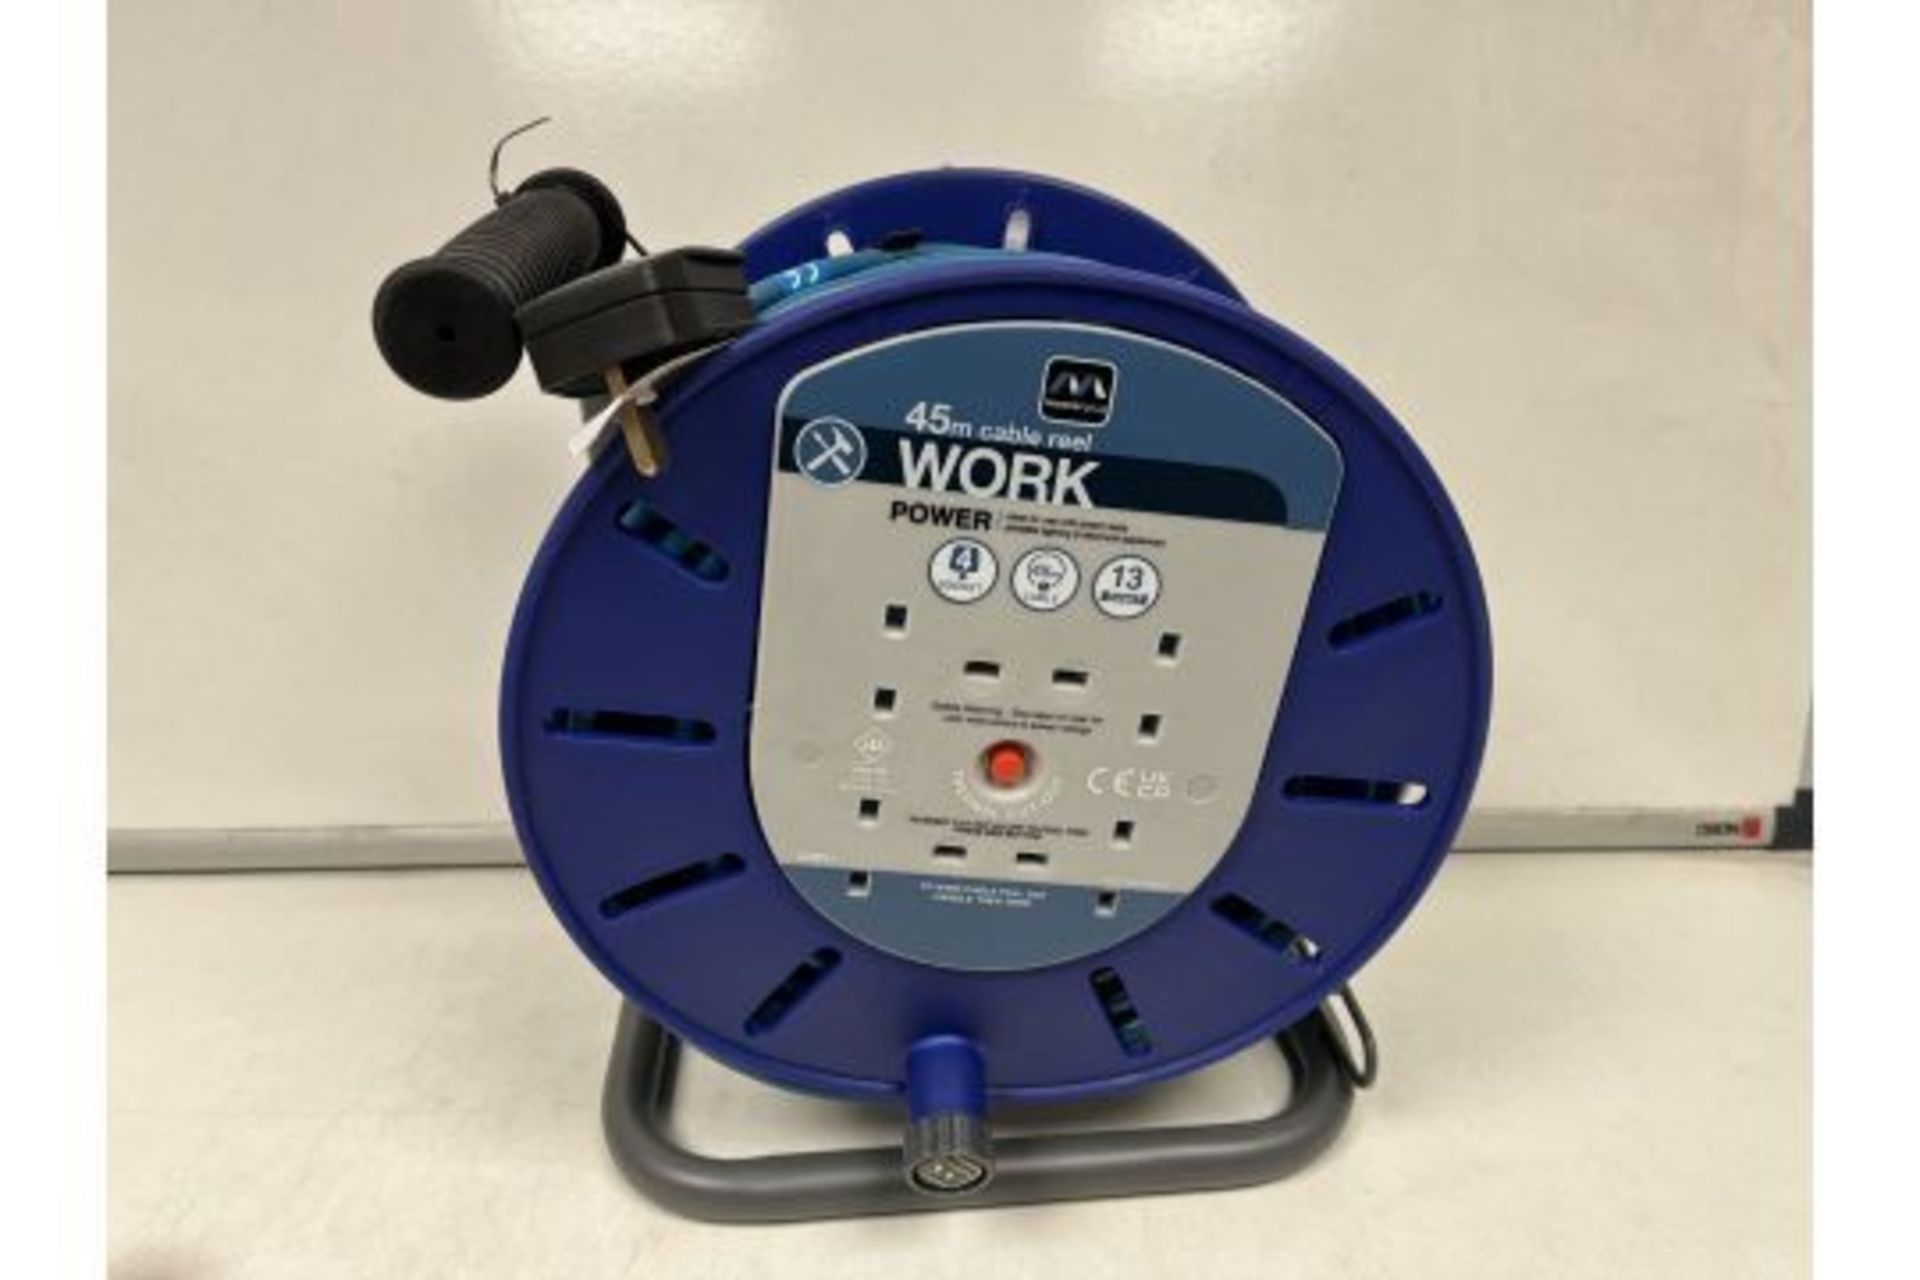 TRADE LOT 10 X NEW BOXED MASTERPLUG 45M CABLE REEL. WORK POWER. 4 SOCKET. 45M CABLE. 13 AMPS WITH - Image 2 of 2